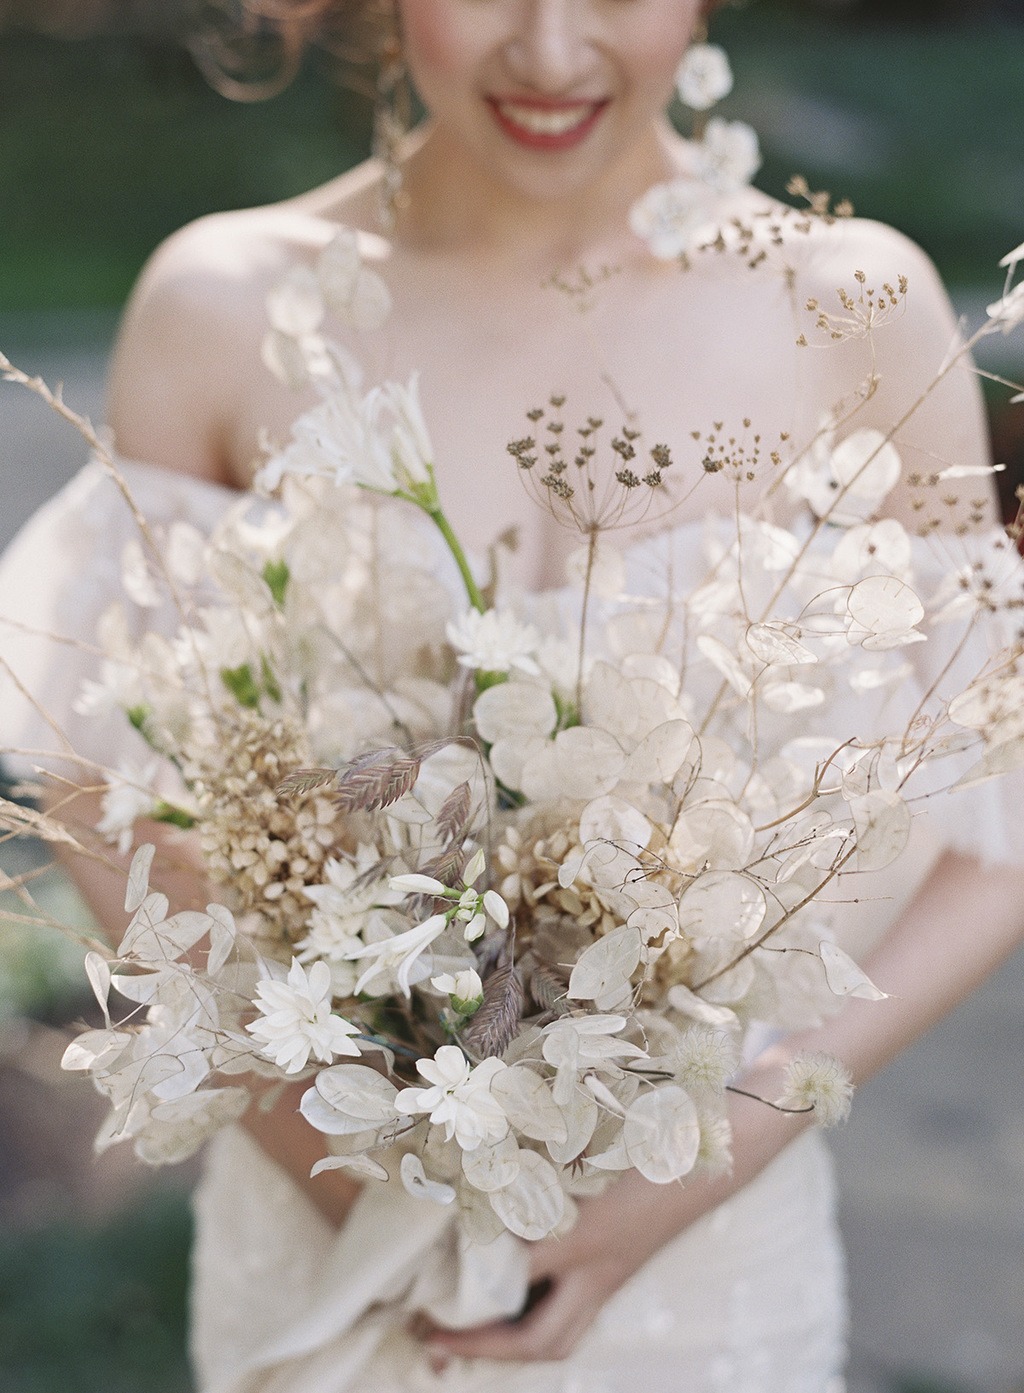 lunaria wedding bouquet with dried leaves